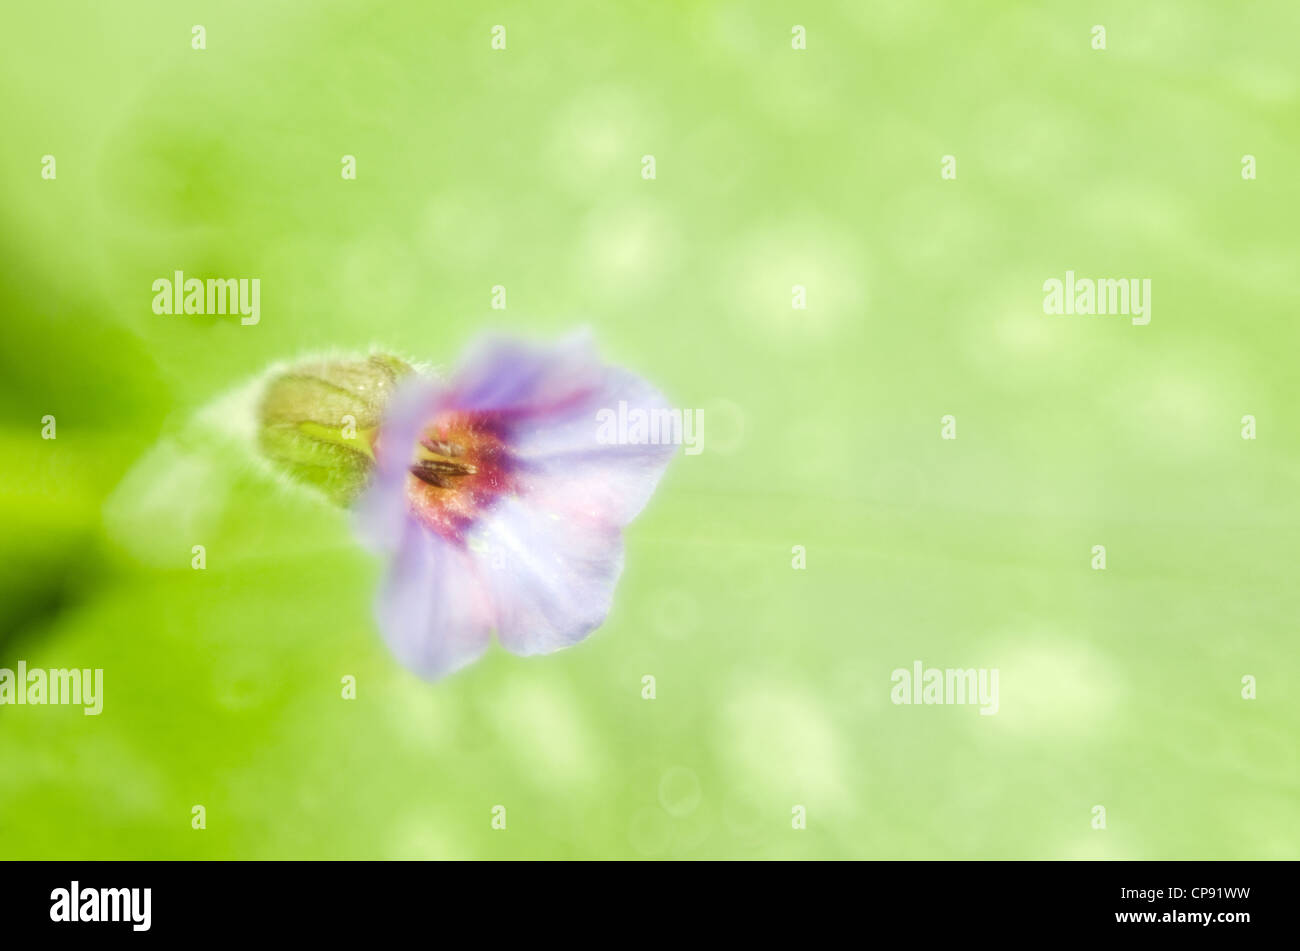 Pulmonaria flower, or lungwort: close up blurred view Stock Photo